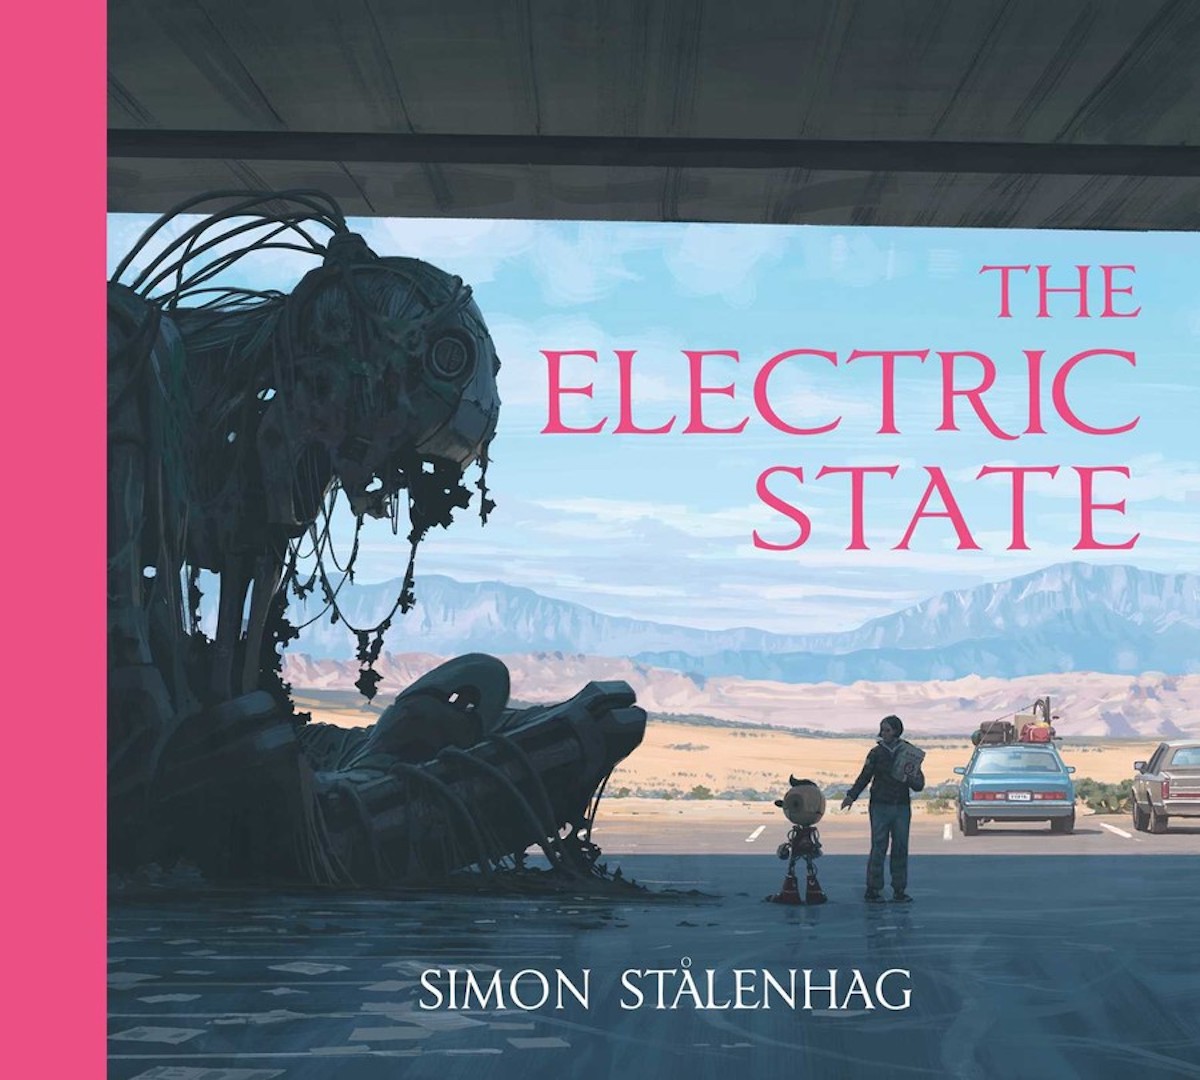 The Cover of Simon Stålenhag's illustrated novel The Electric State